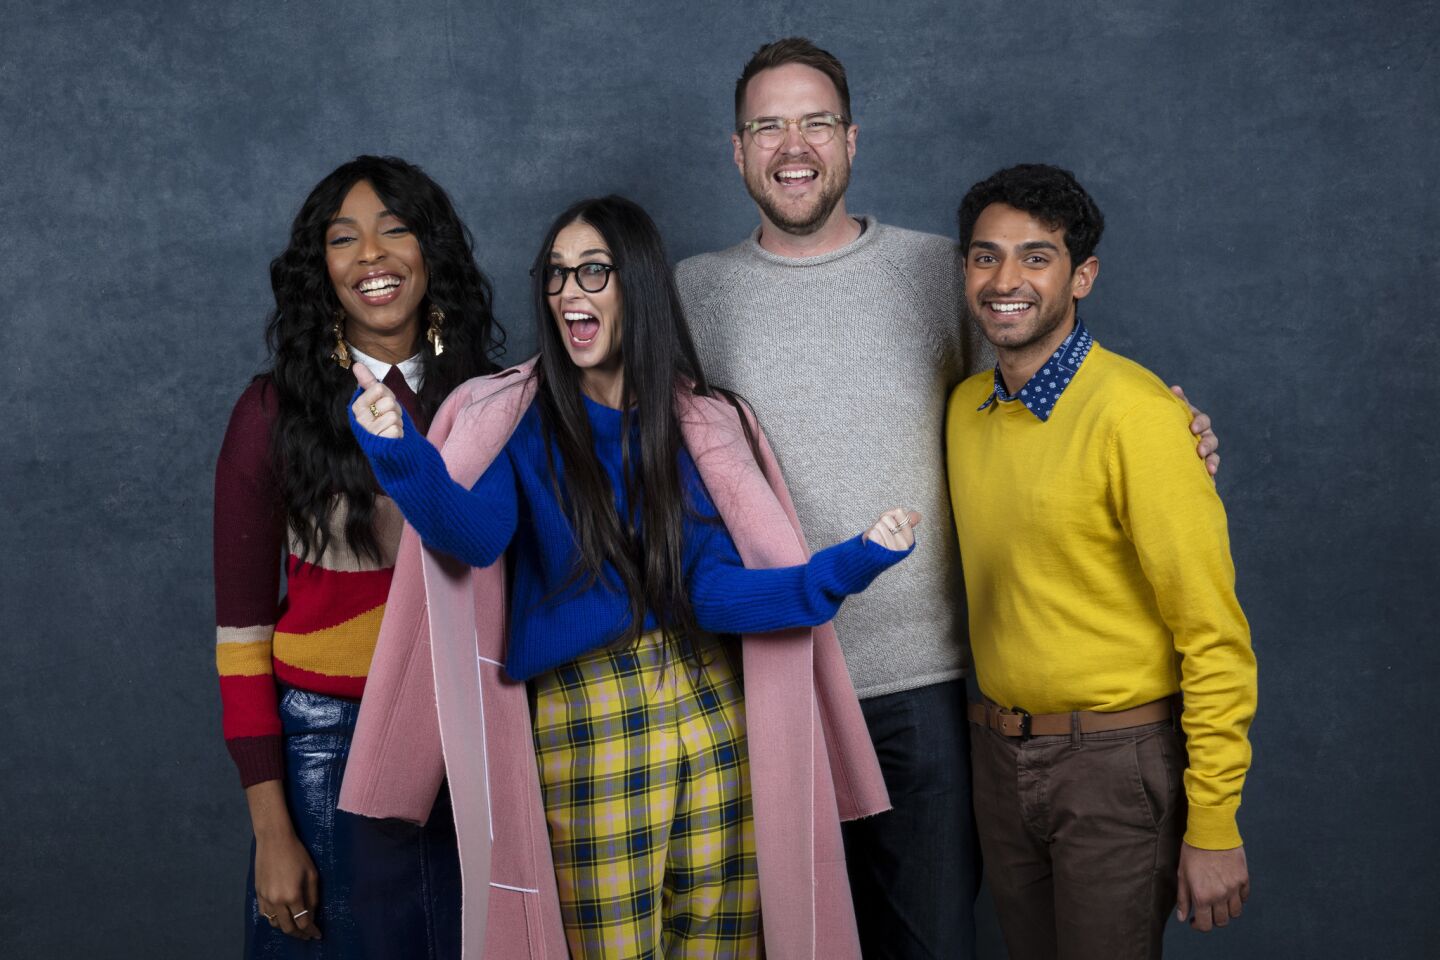 Actors Jessica Williams and Demi Moore, director Patrick Brice and actor Karan Soni from the film "Corporate Animals."